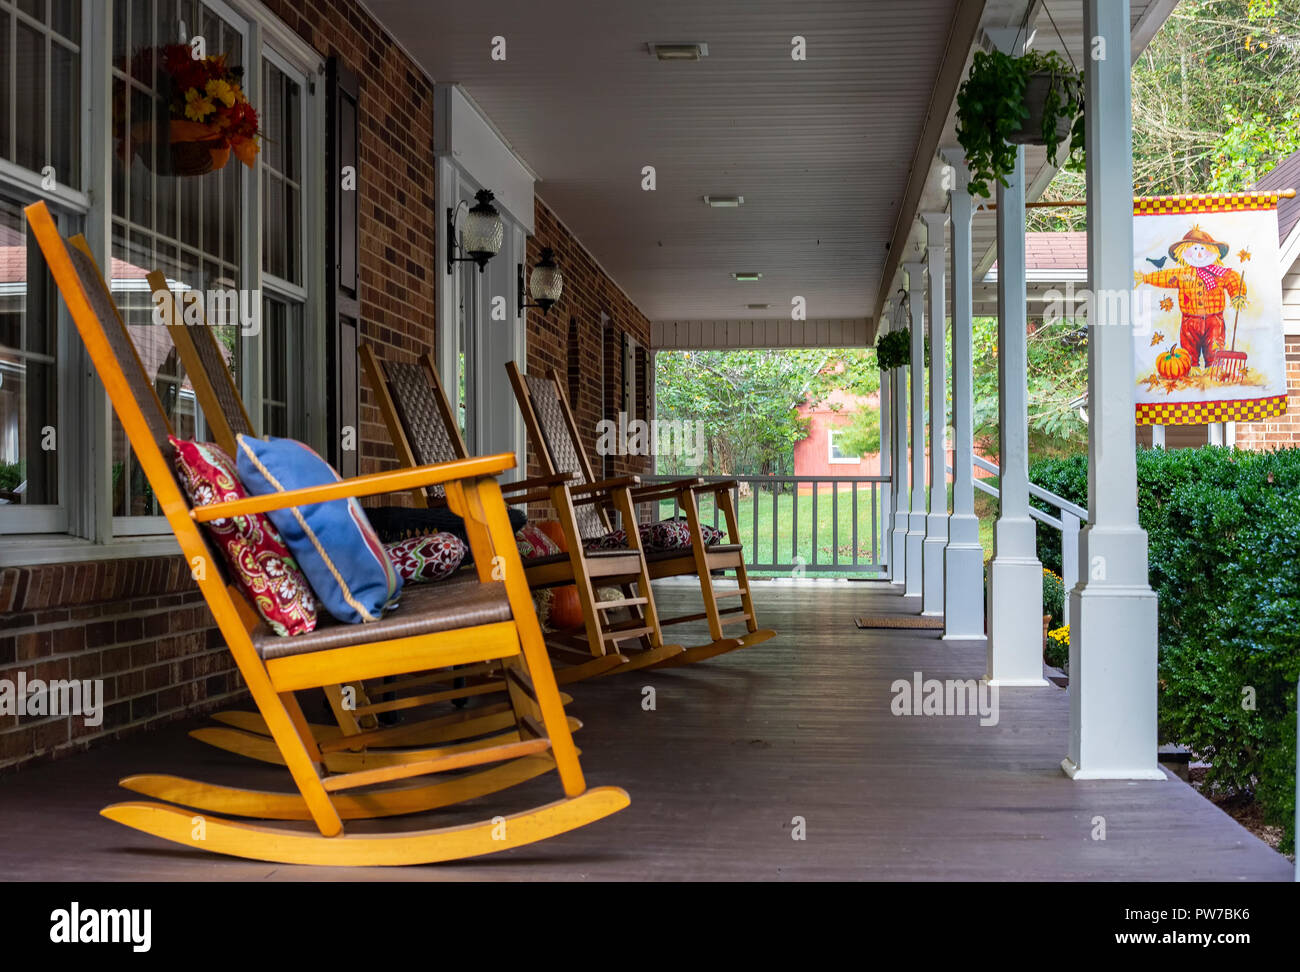 Rocking chairs lined up on long front porch. Red barn is in the background. Stock Photo